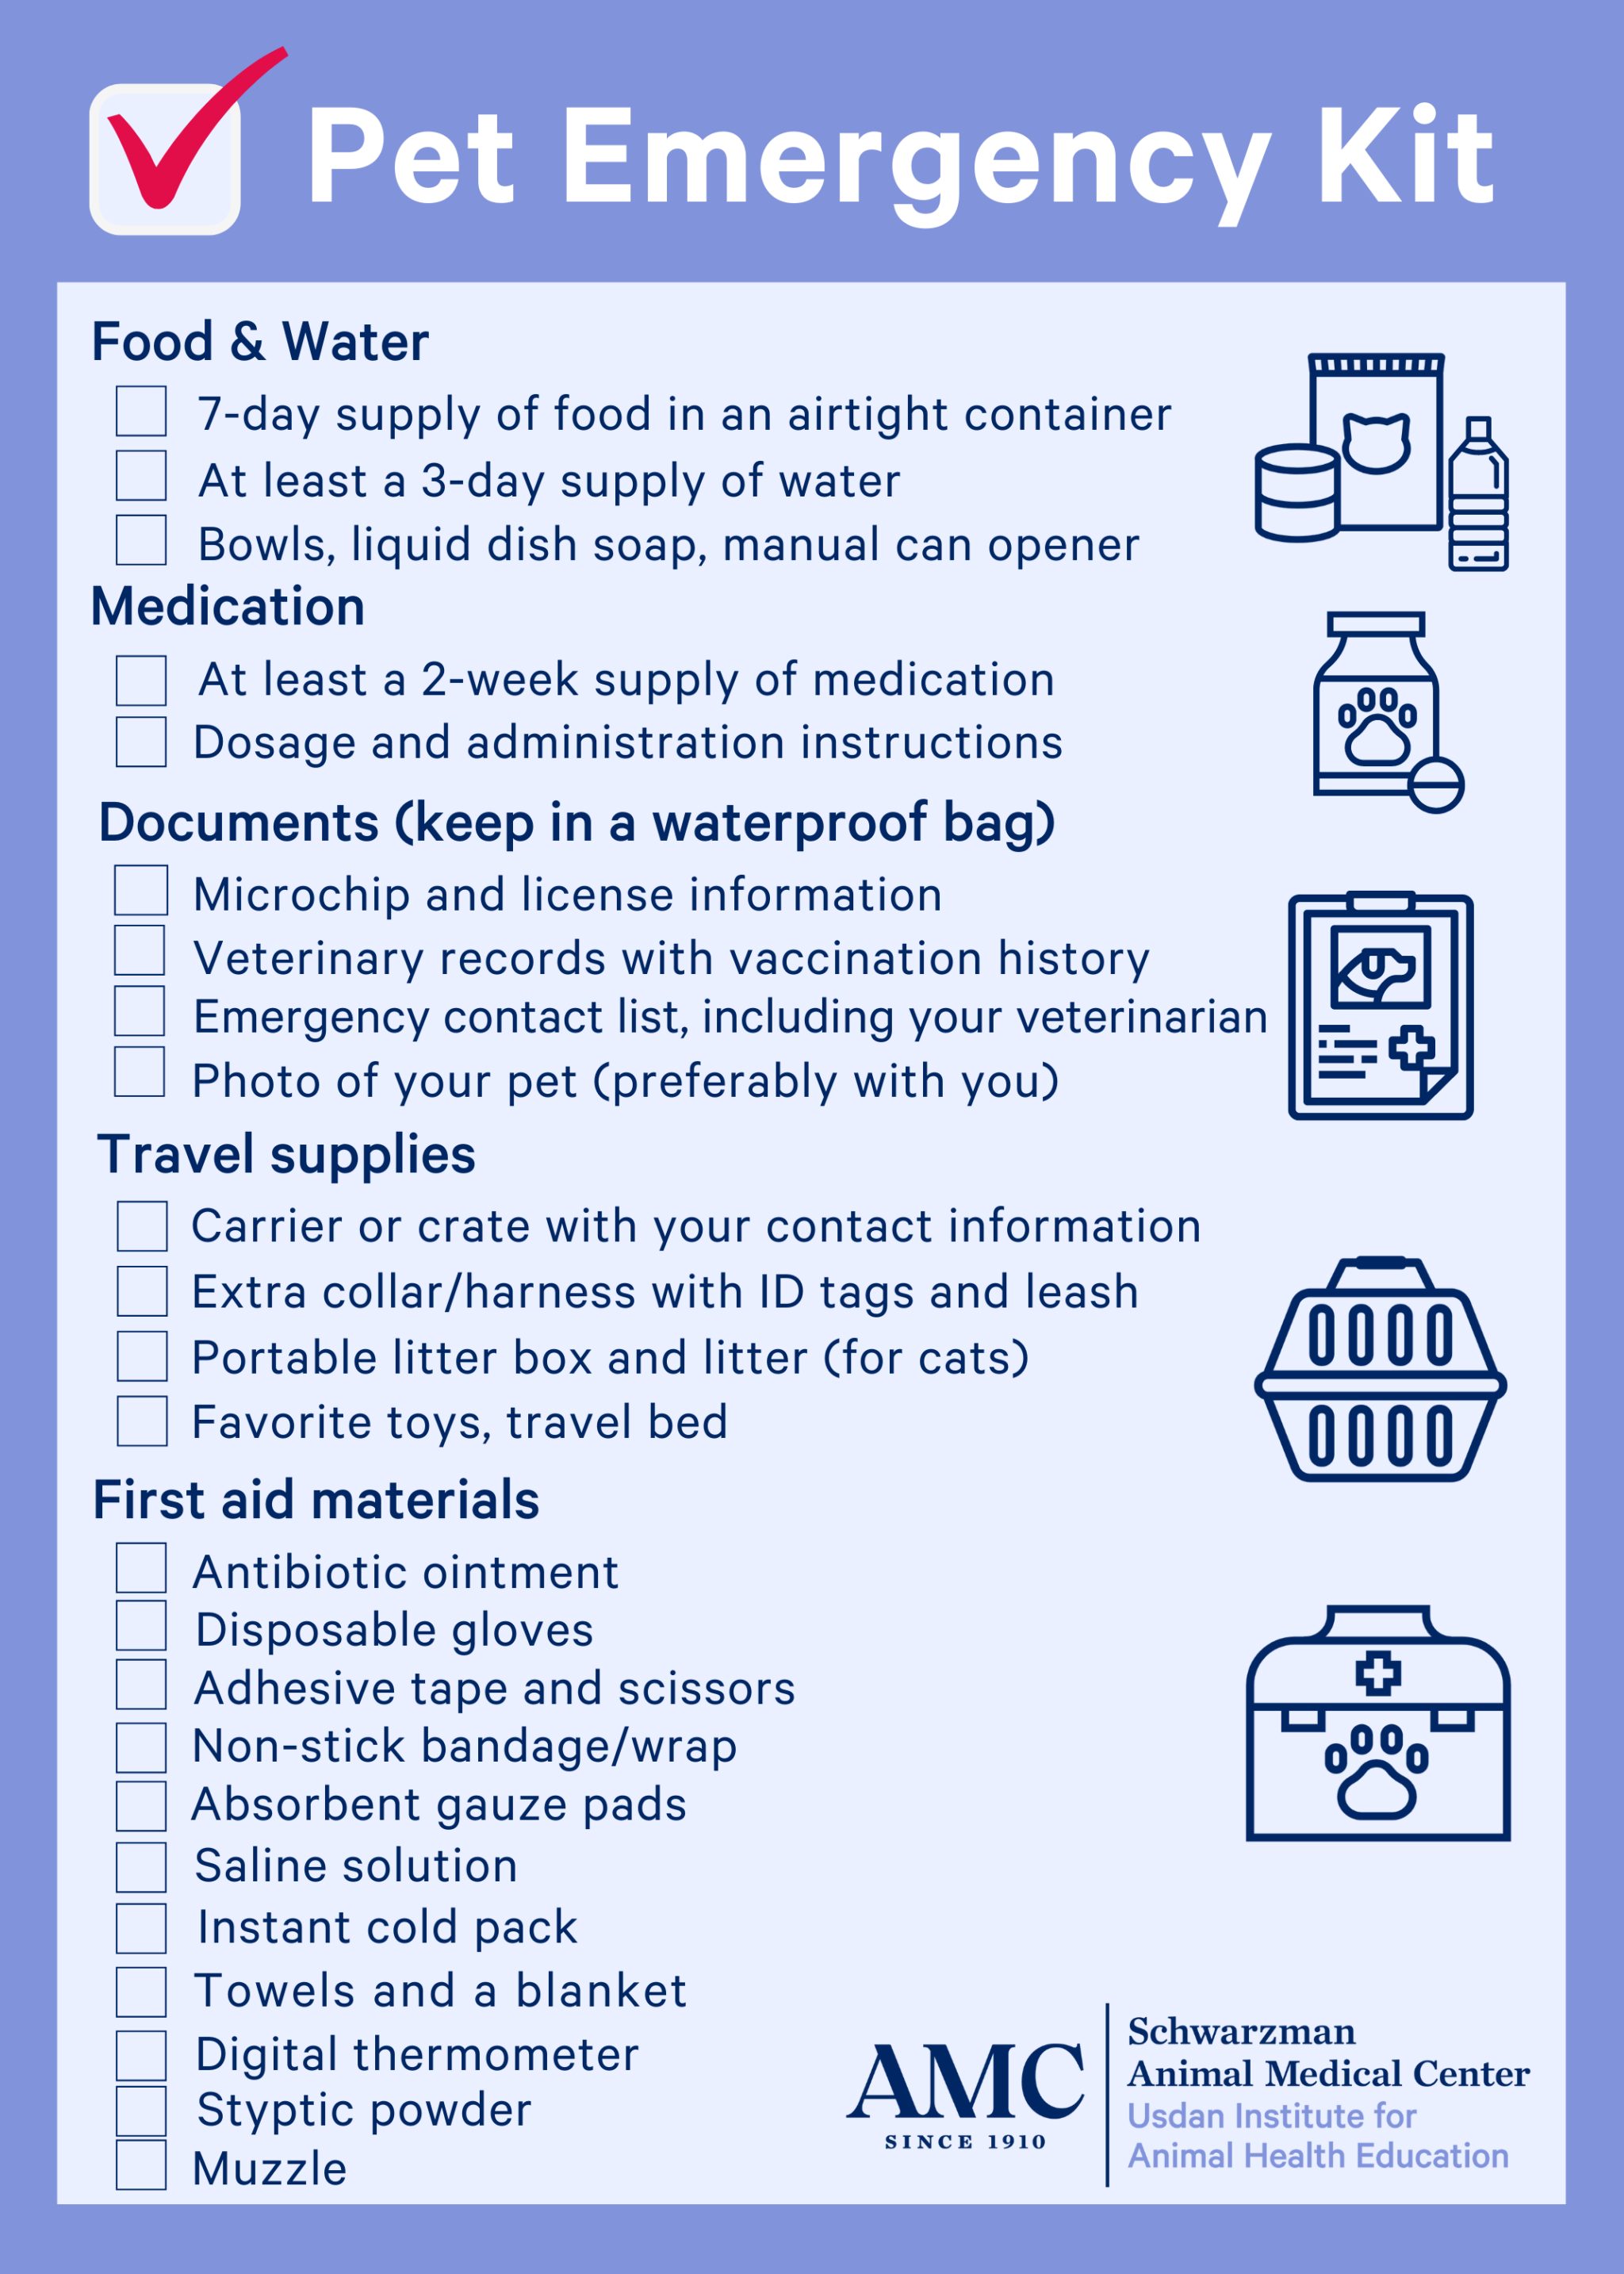 Emergency and First Aid Kit Checklist - The Animal Medical Center